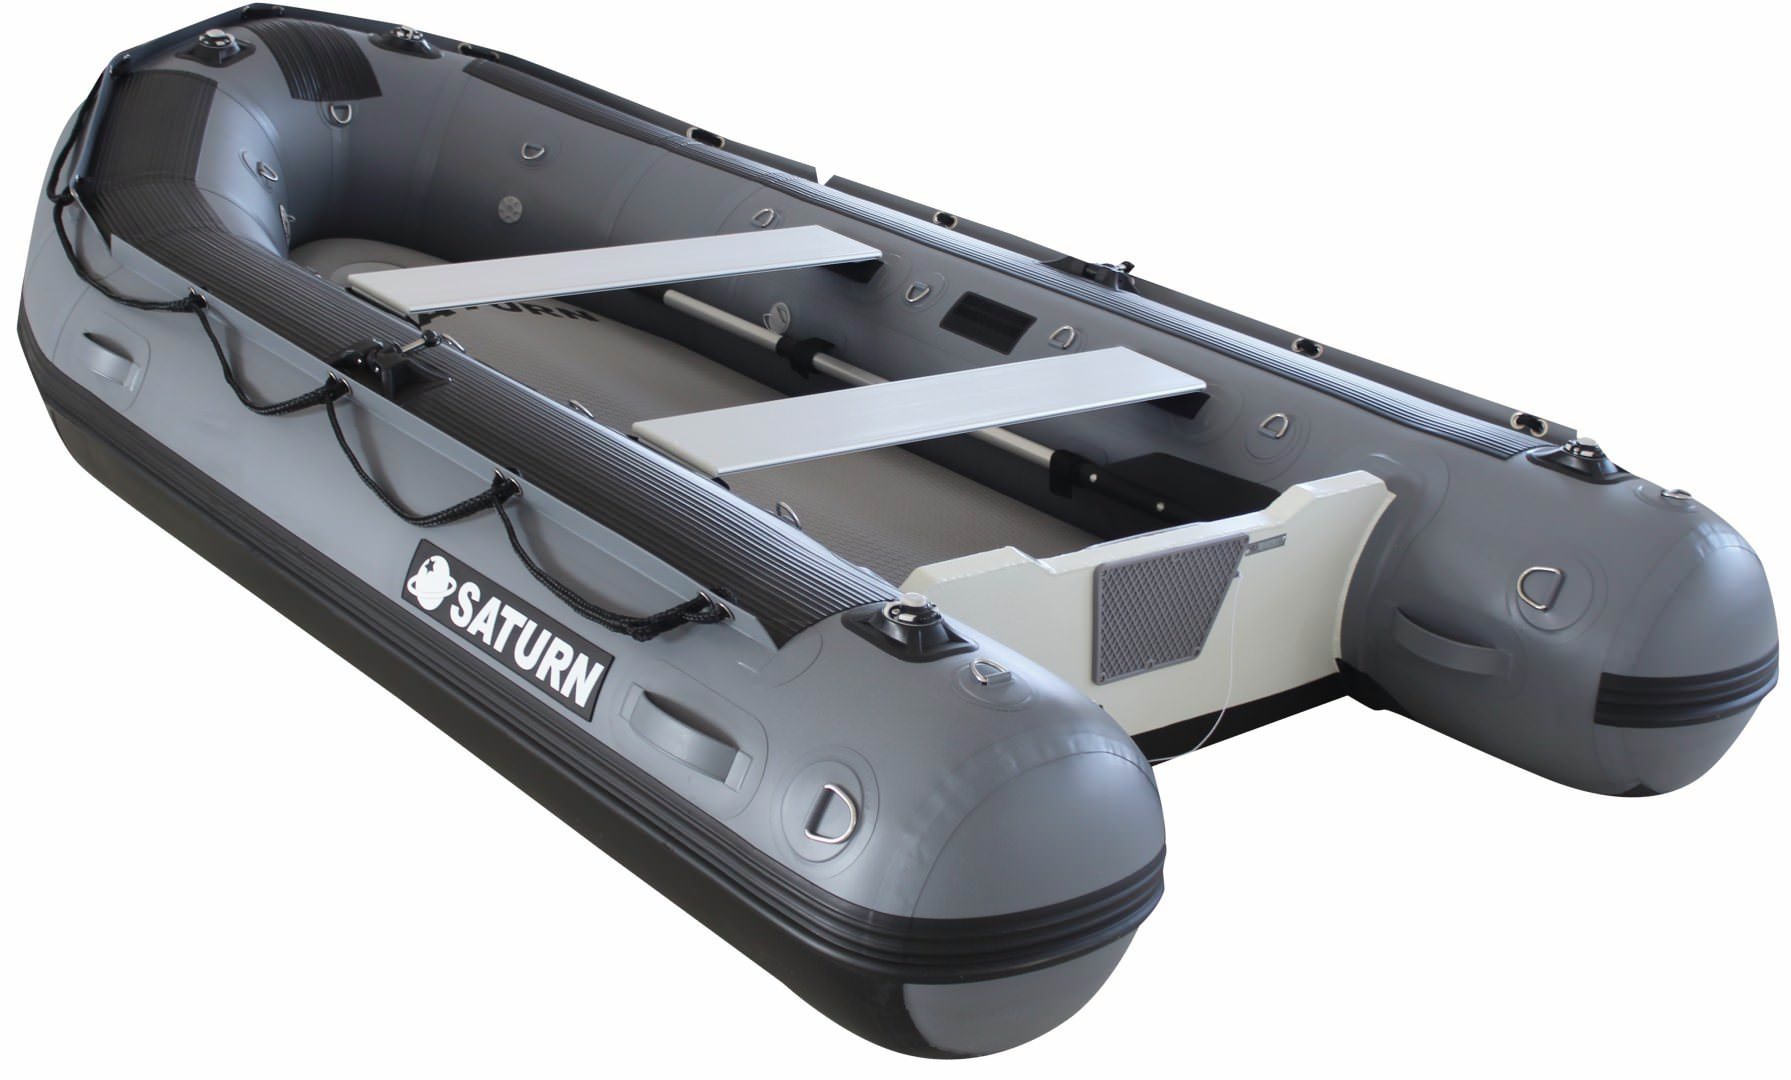 11' Saturn Heavy-Duty Fishing and Work Inflatable Boats with